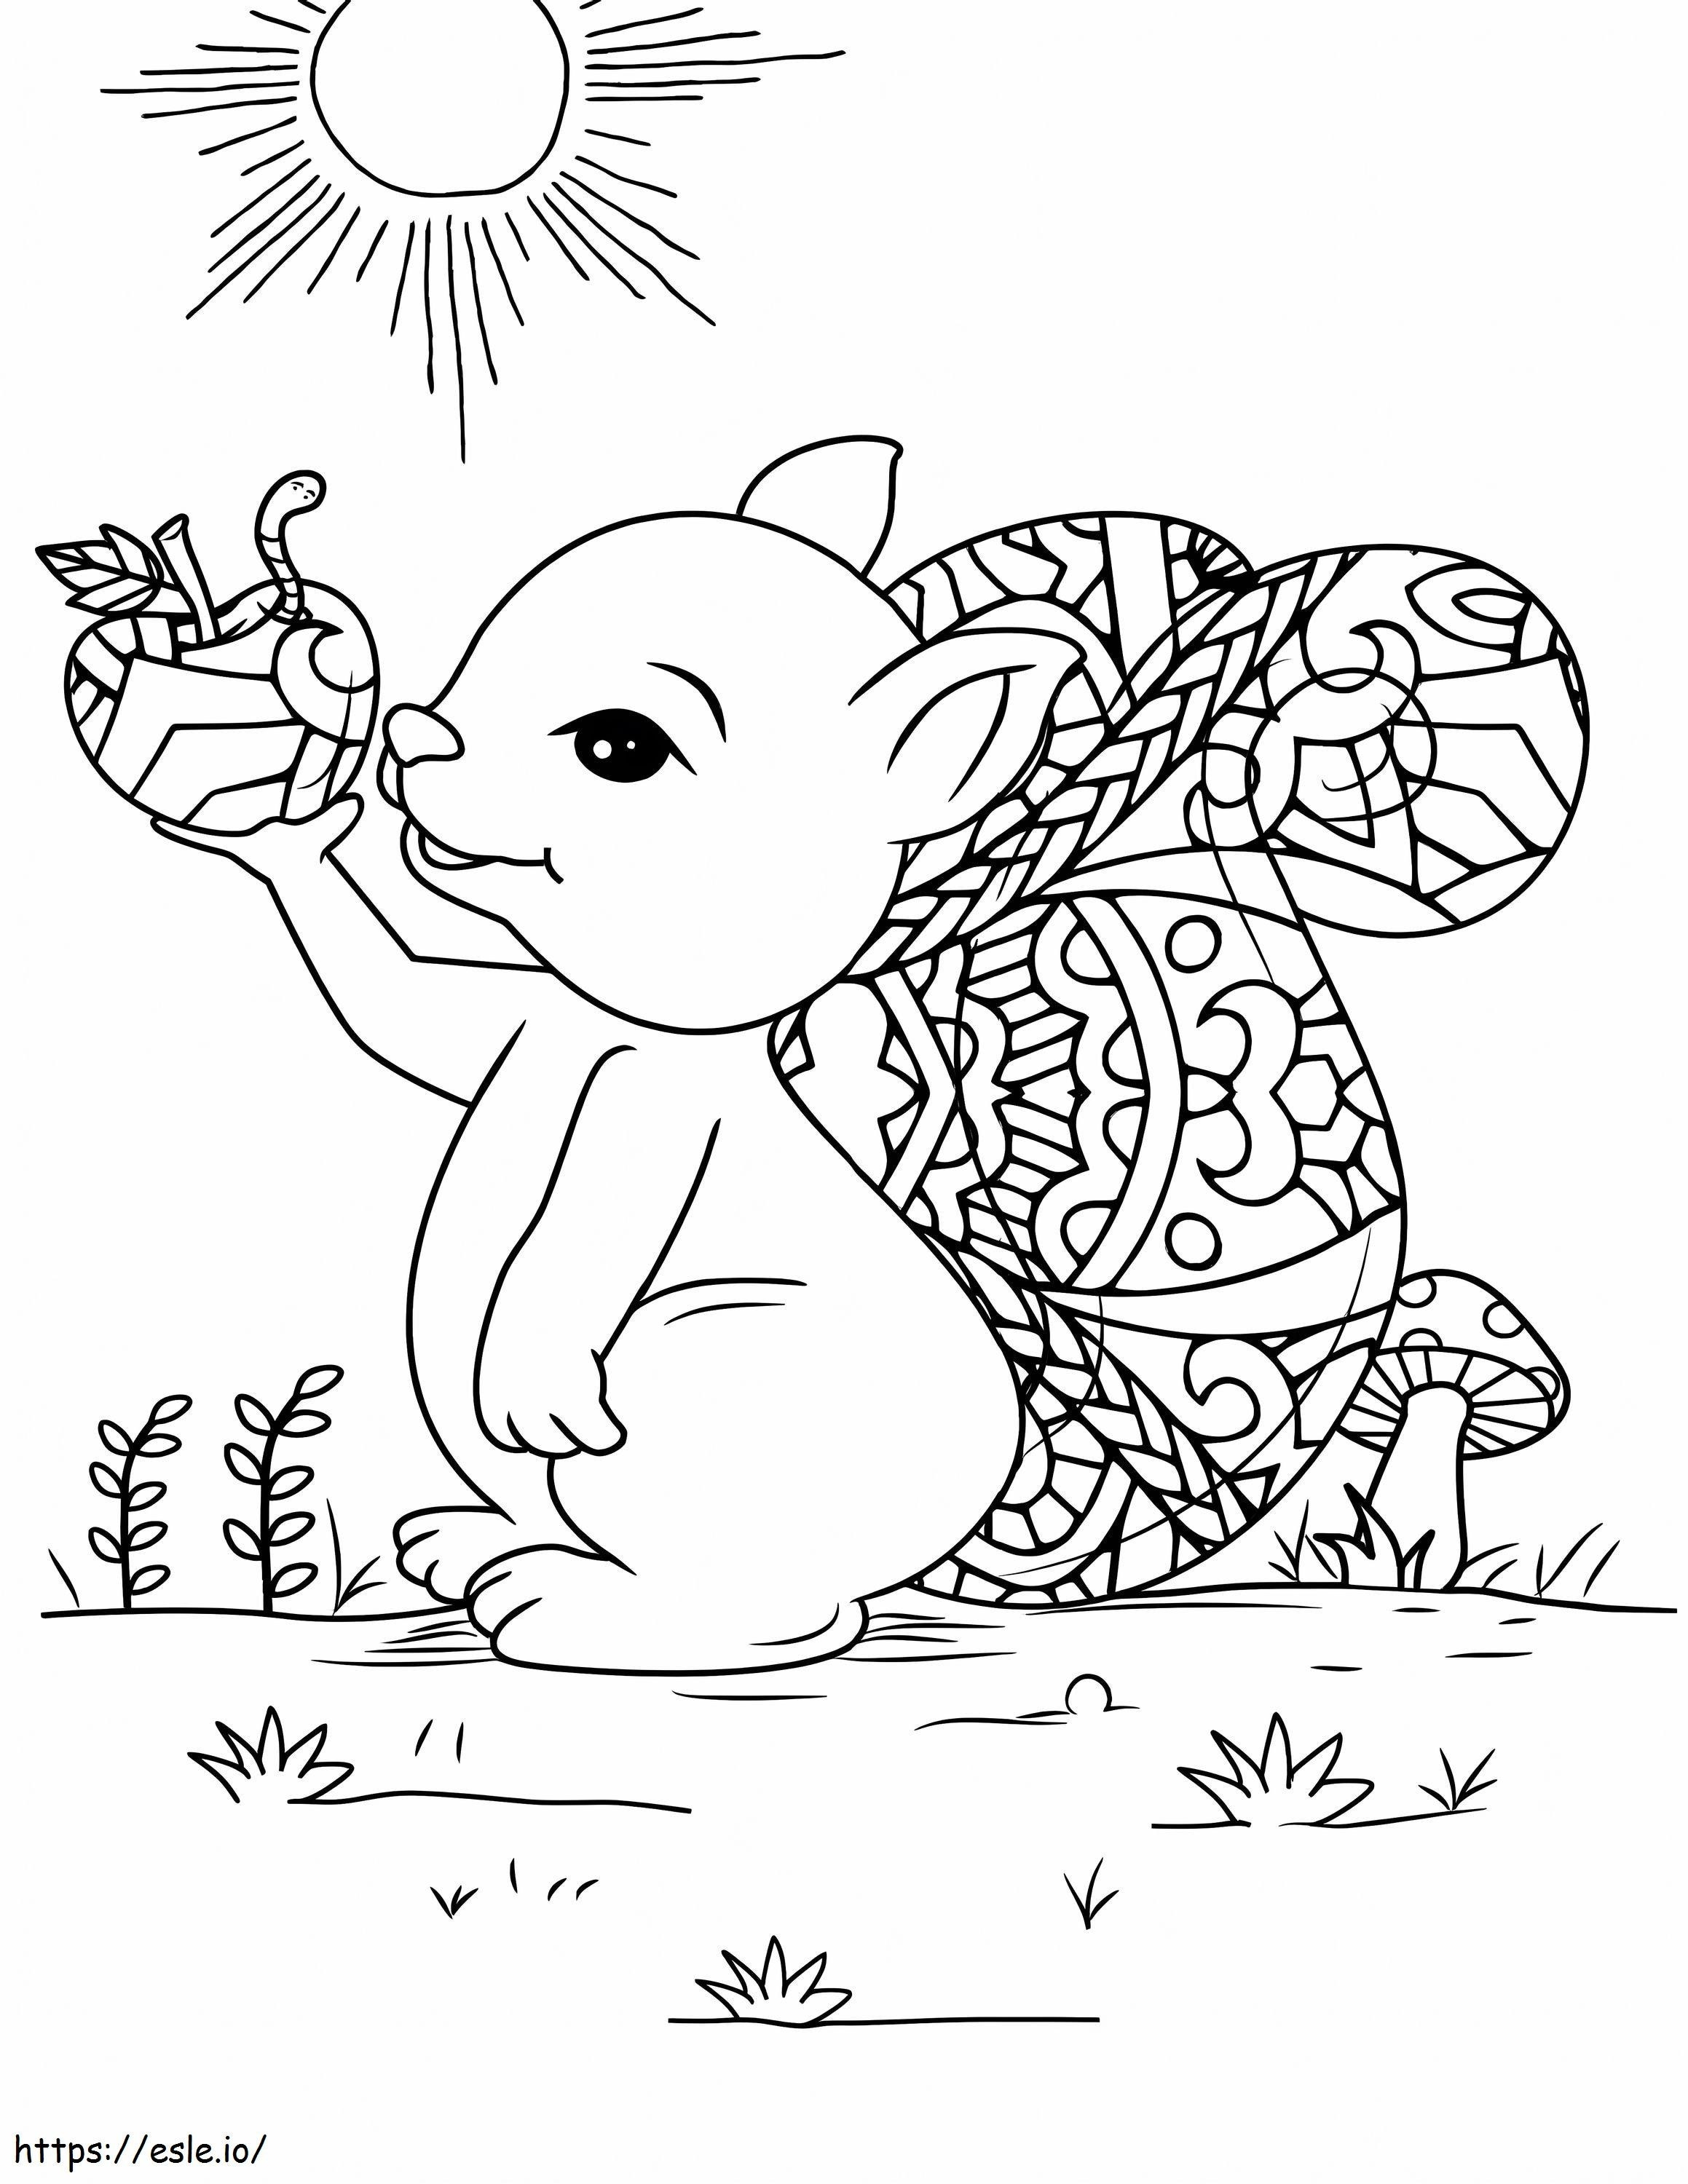 Squirrel With An Apple coloring page